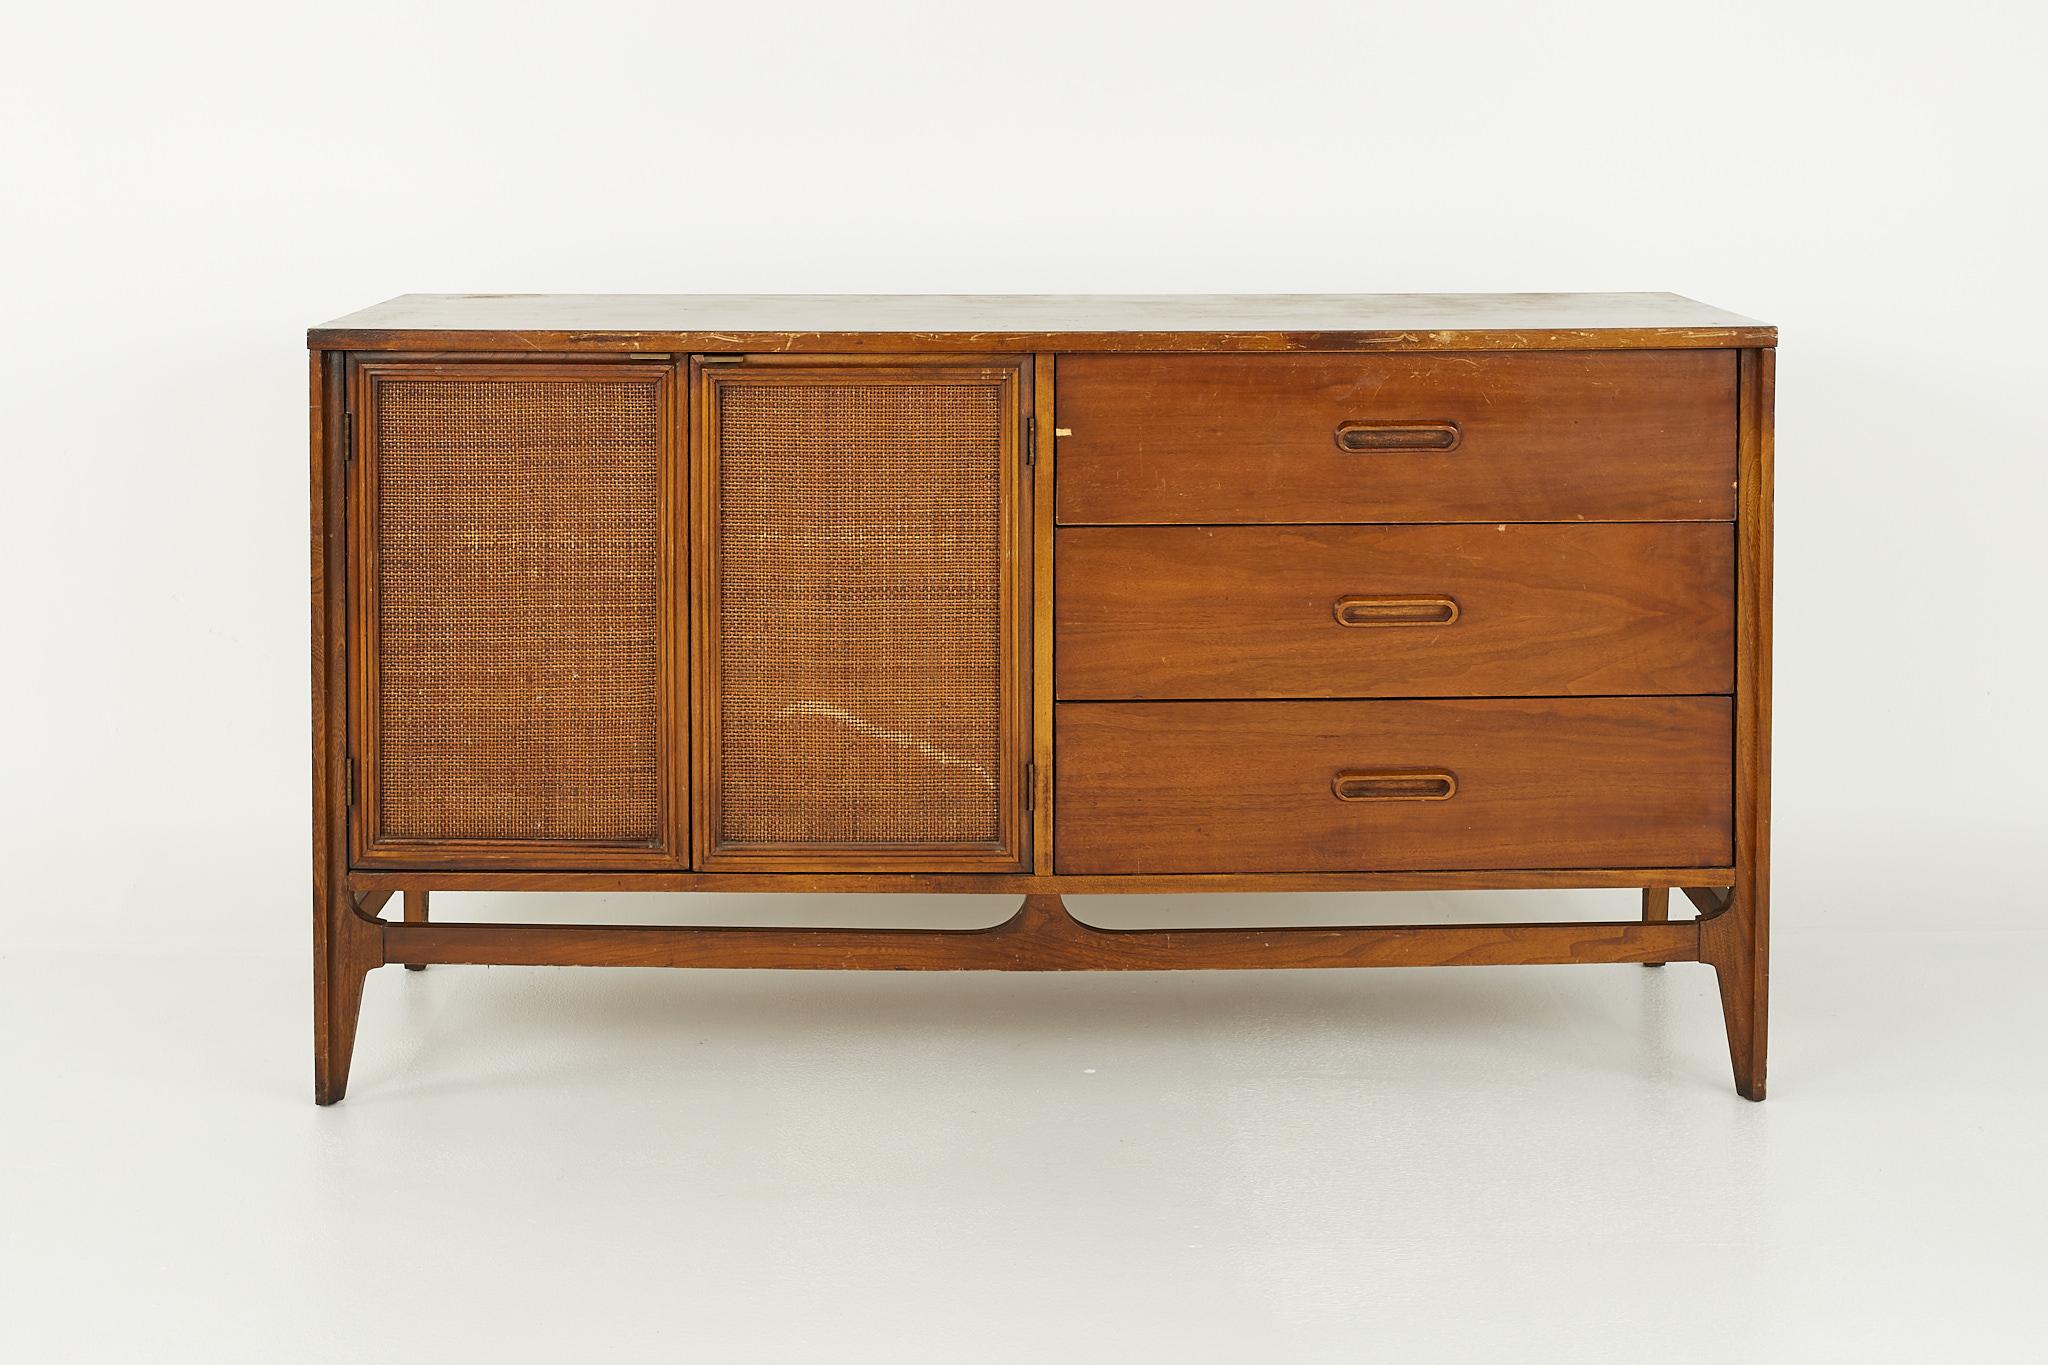 Lane style mid century walnut and cane front credenza

Credenza measures: 56 wide x 19 deep x 30 inches high

?All pieces of furniture can be had in what we call restored vintage condition. That means the piece is restored upon purchase so it’s